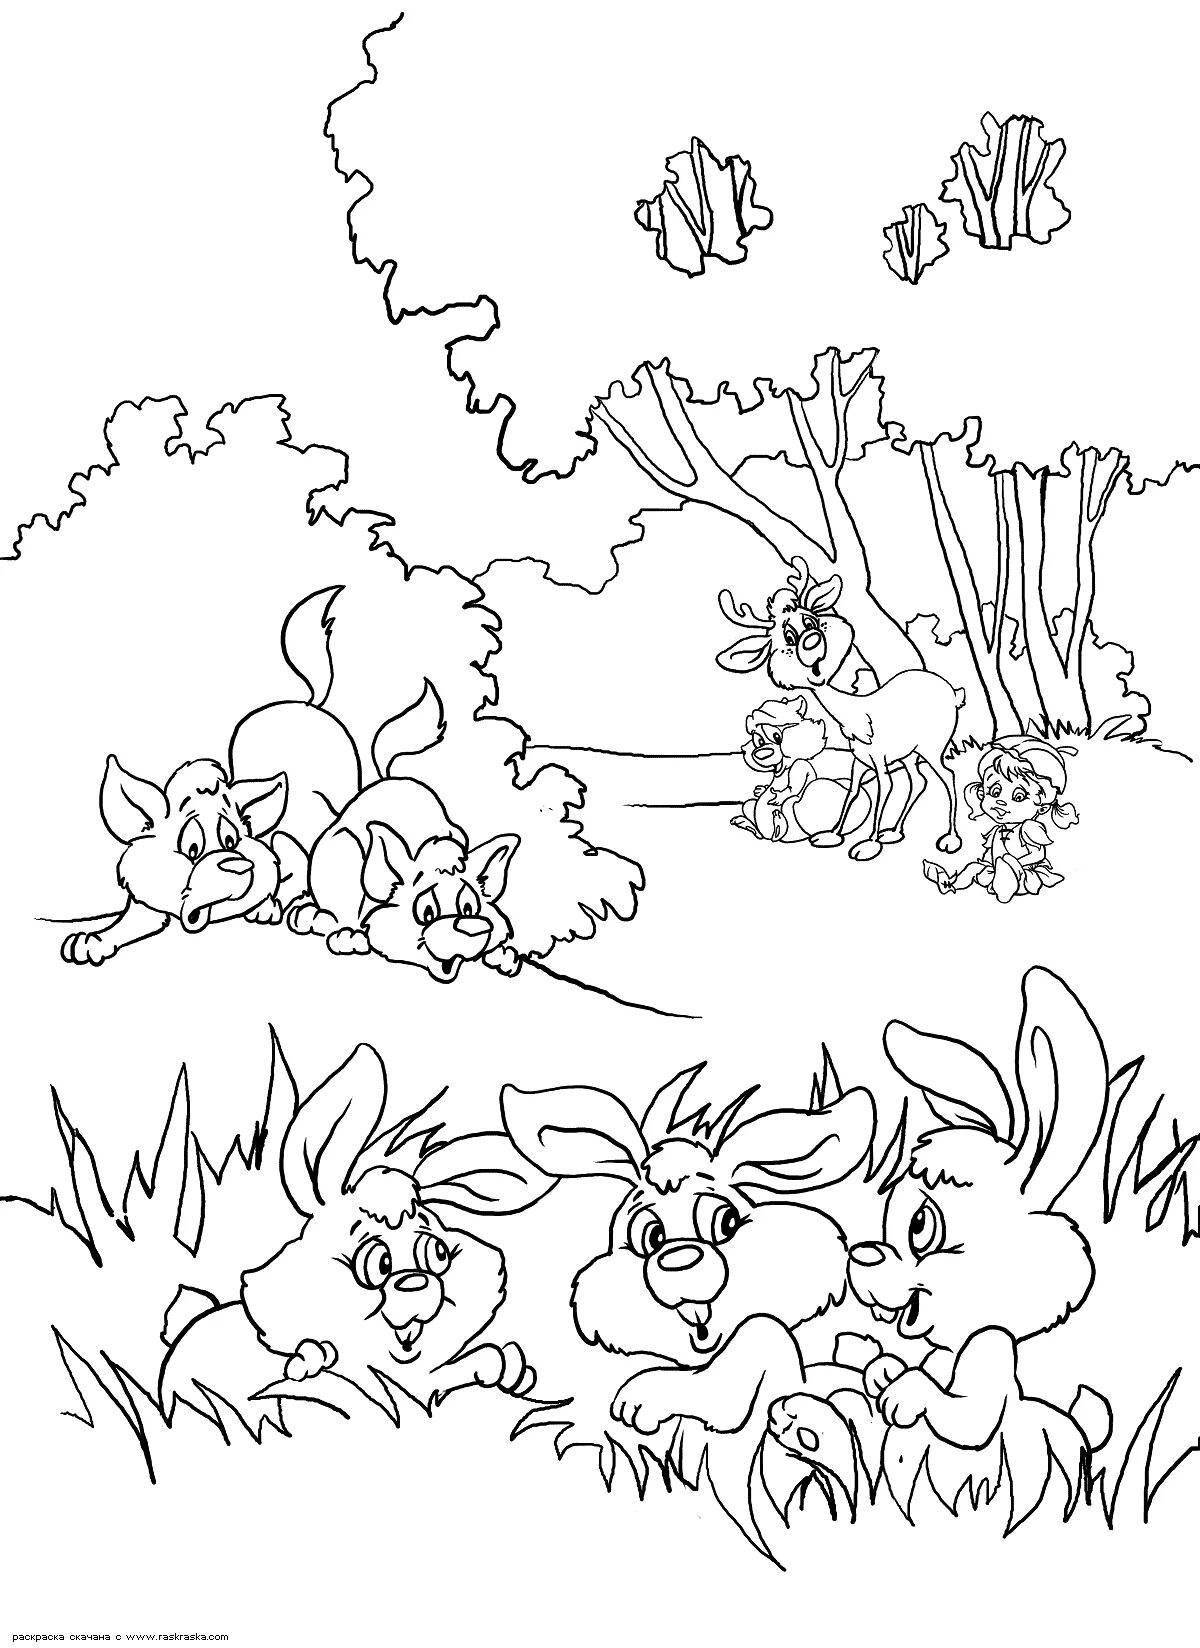 Exciting hunter and rabbit coloring pages